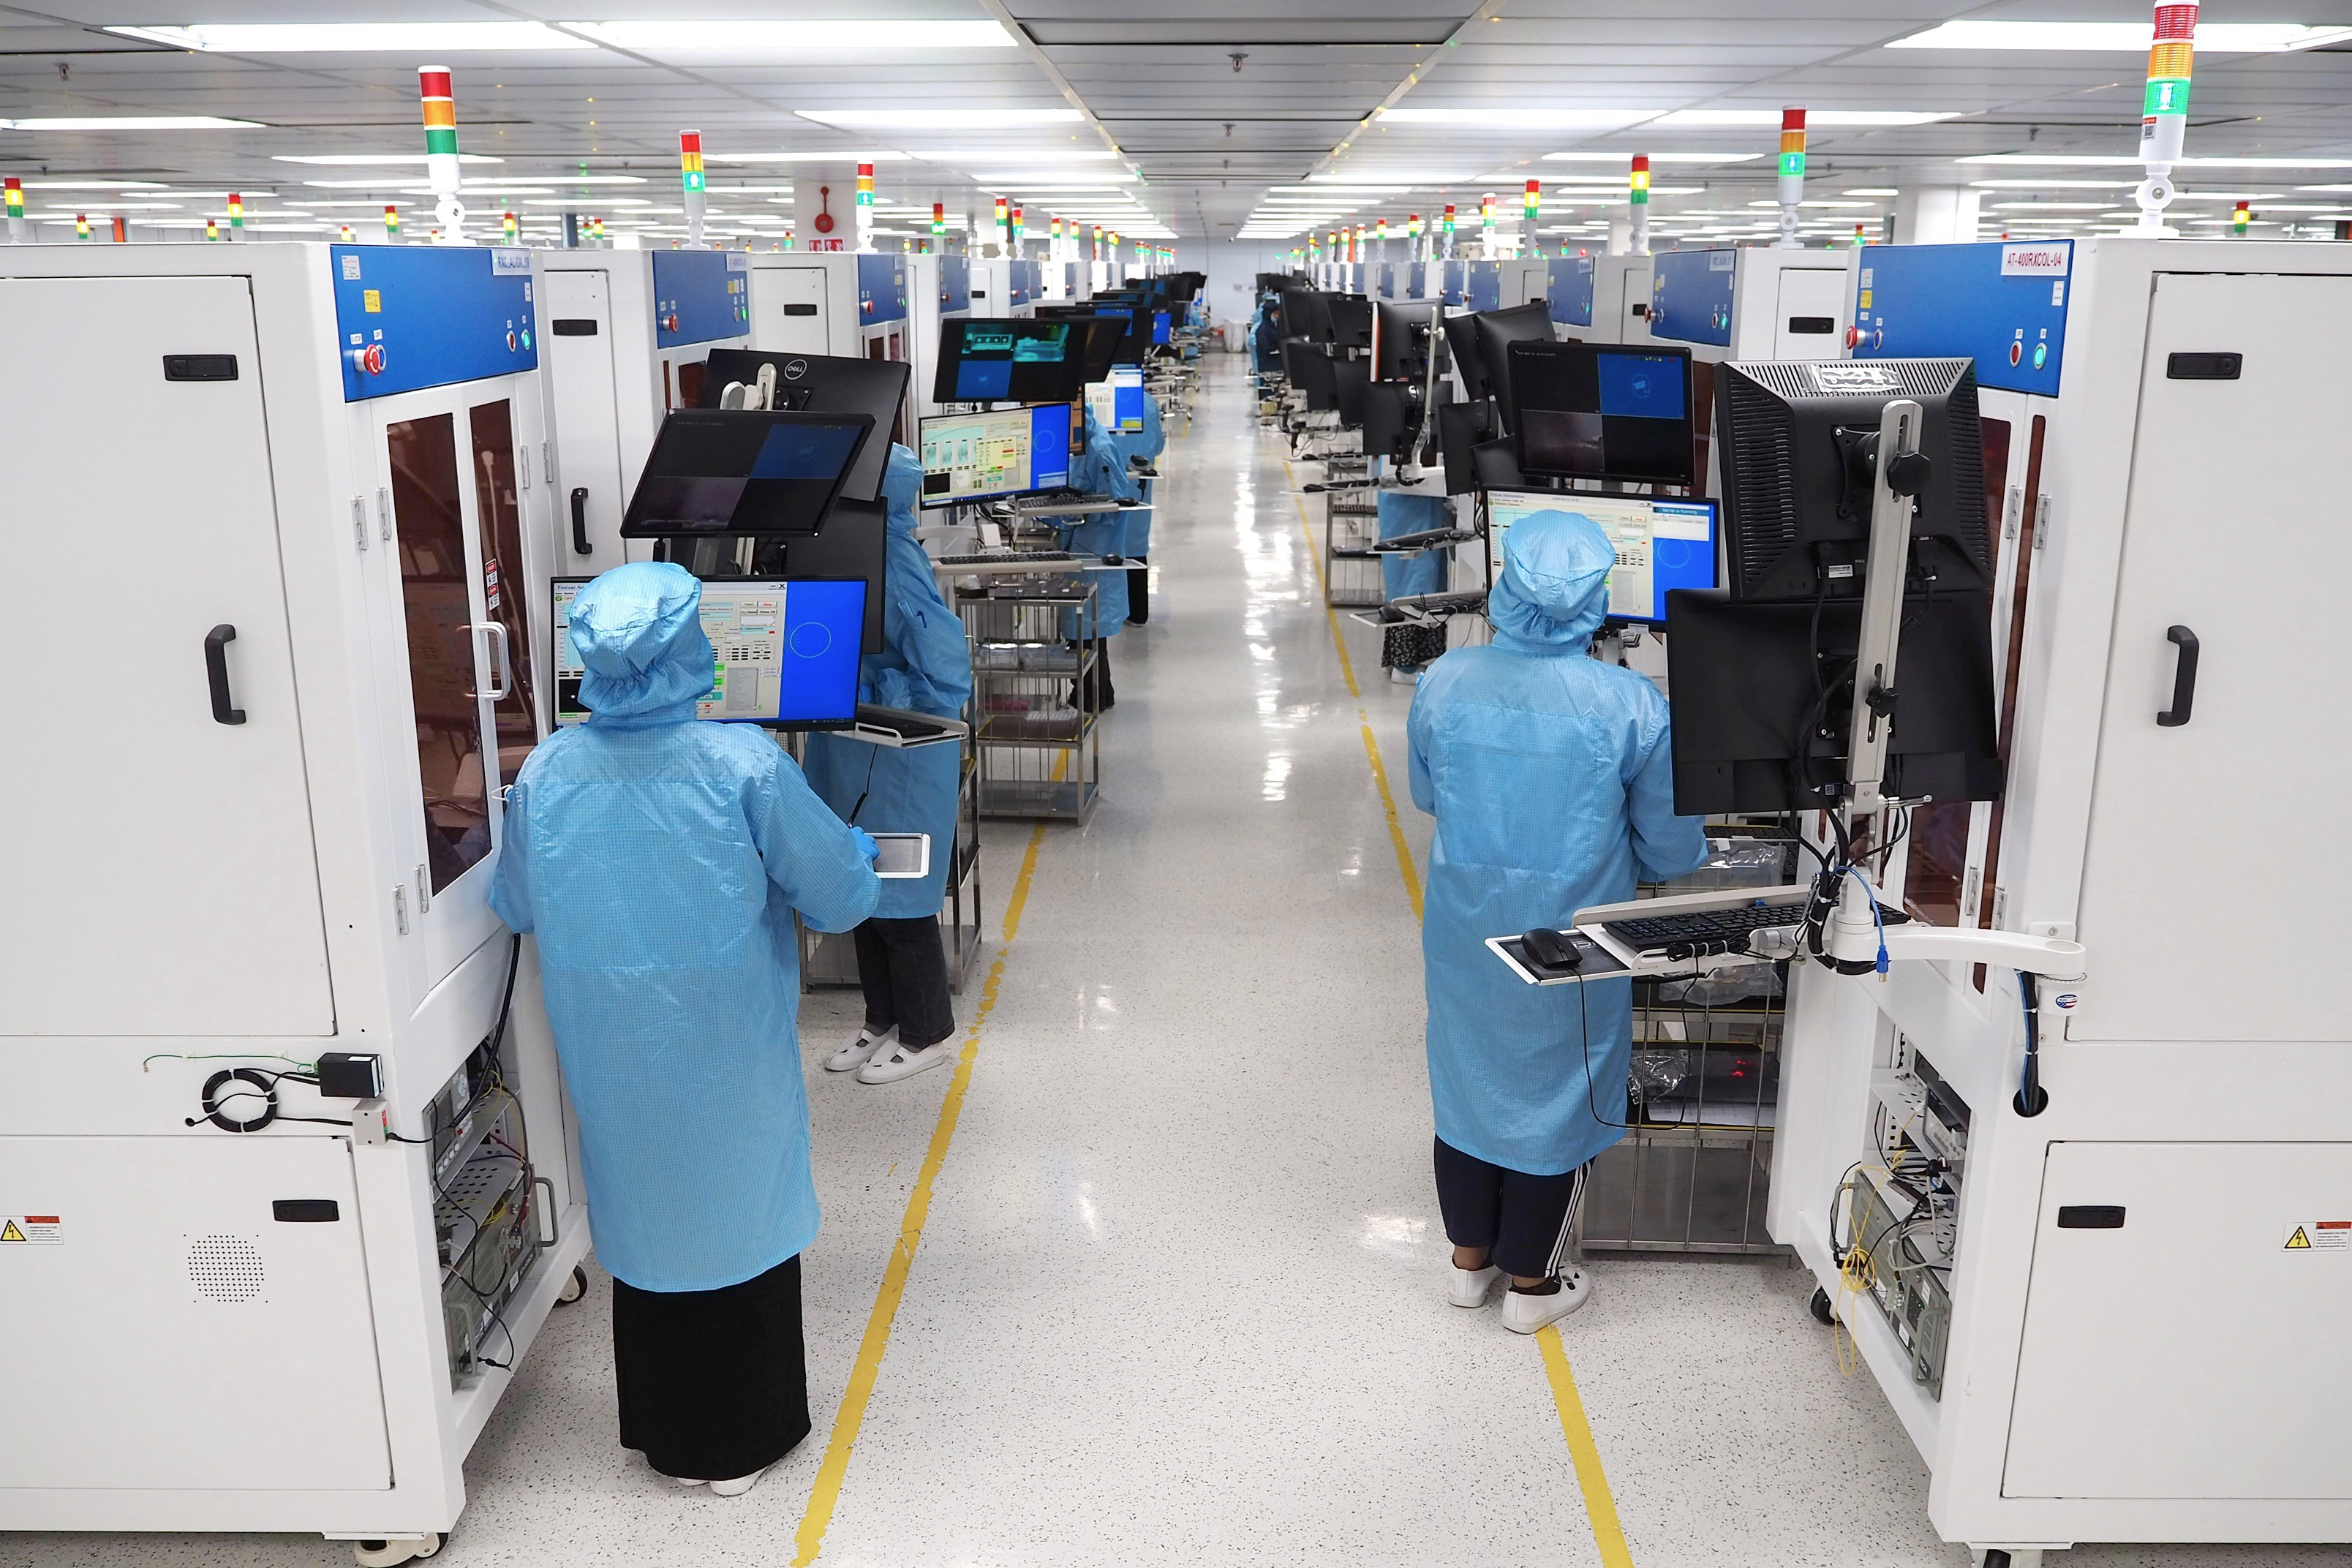 Coherent Reaches a Manufacturing Milestone: 300 Million Transceivers Shipped From Ipoh, Malaysia, Facility